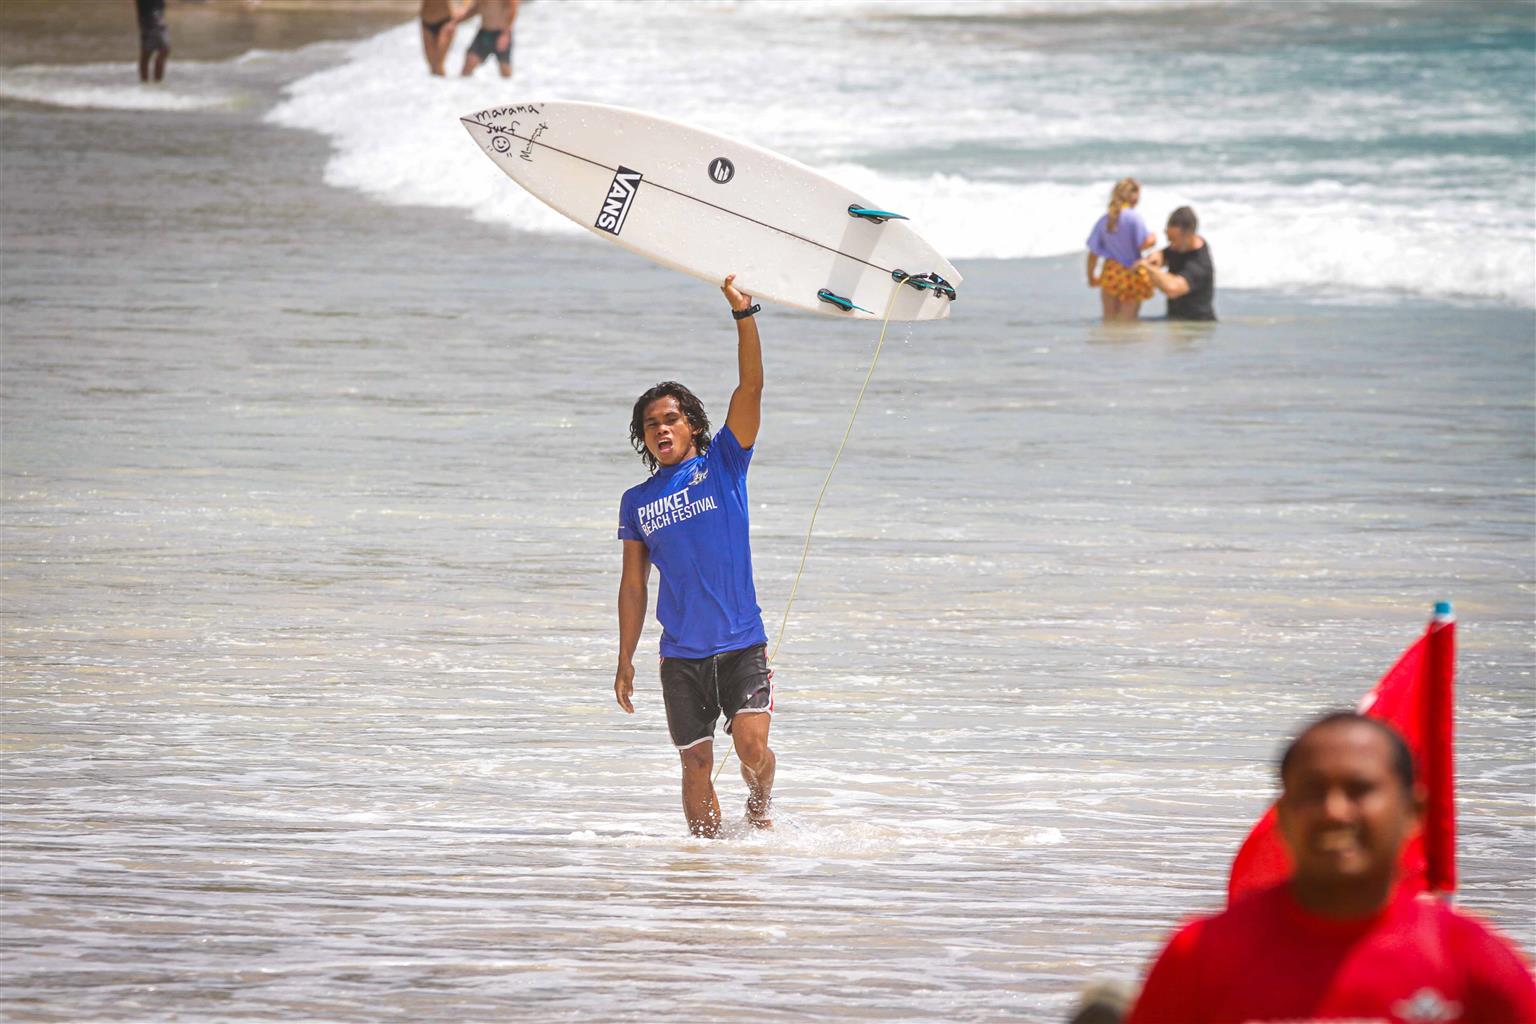 Phuket Beach Festival's International Surfing Competition Kicked Off Today  at Kata Beach With Over 100 Surfers from South East Asia - Asian Surf Co